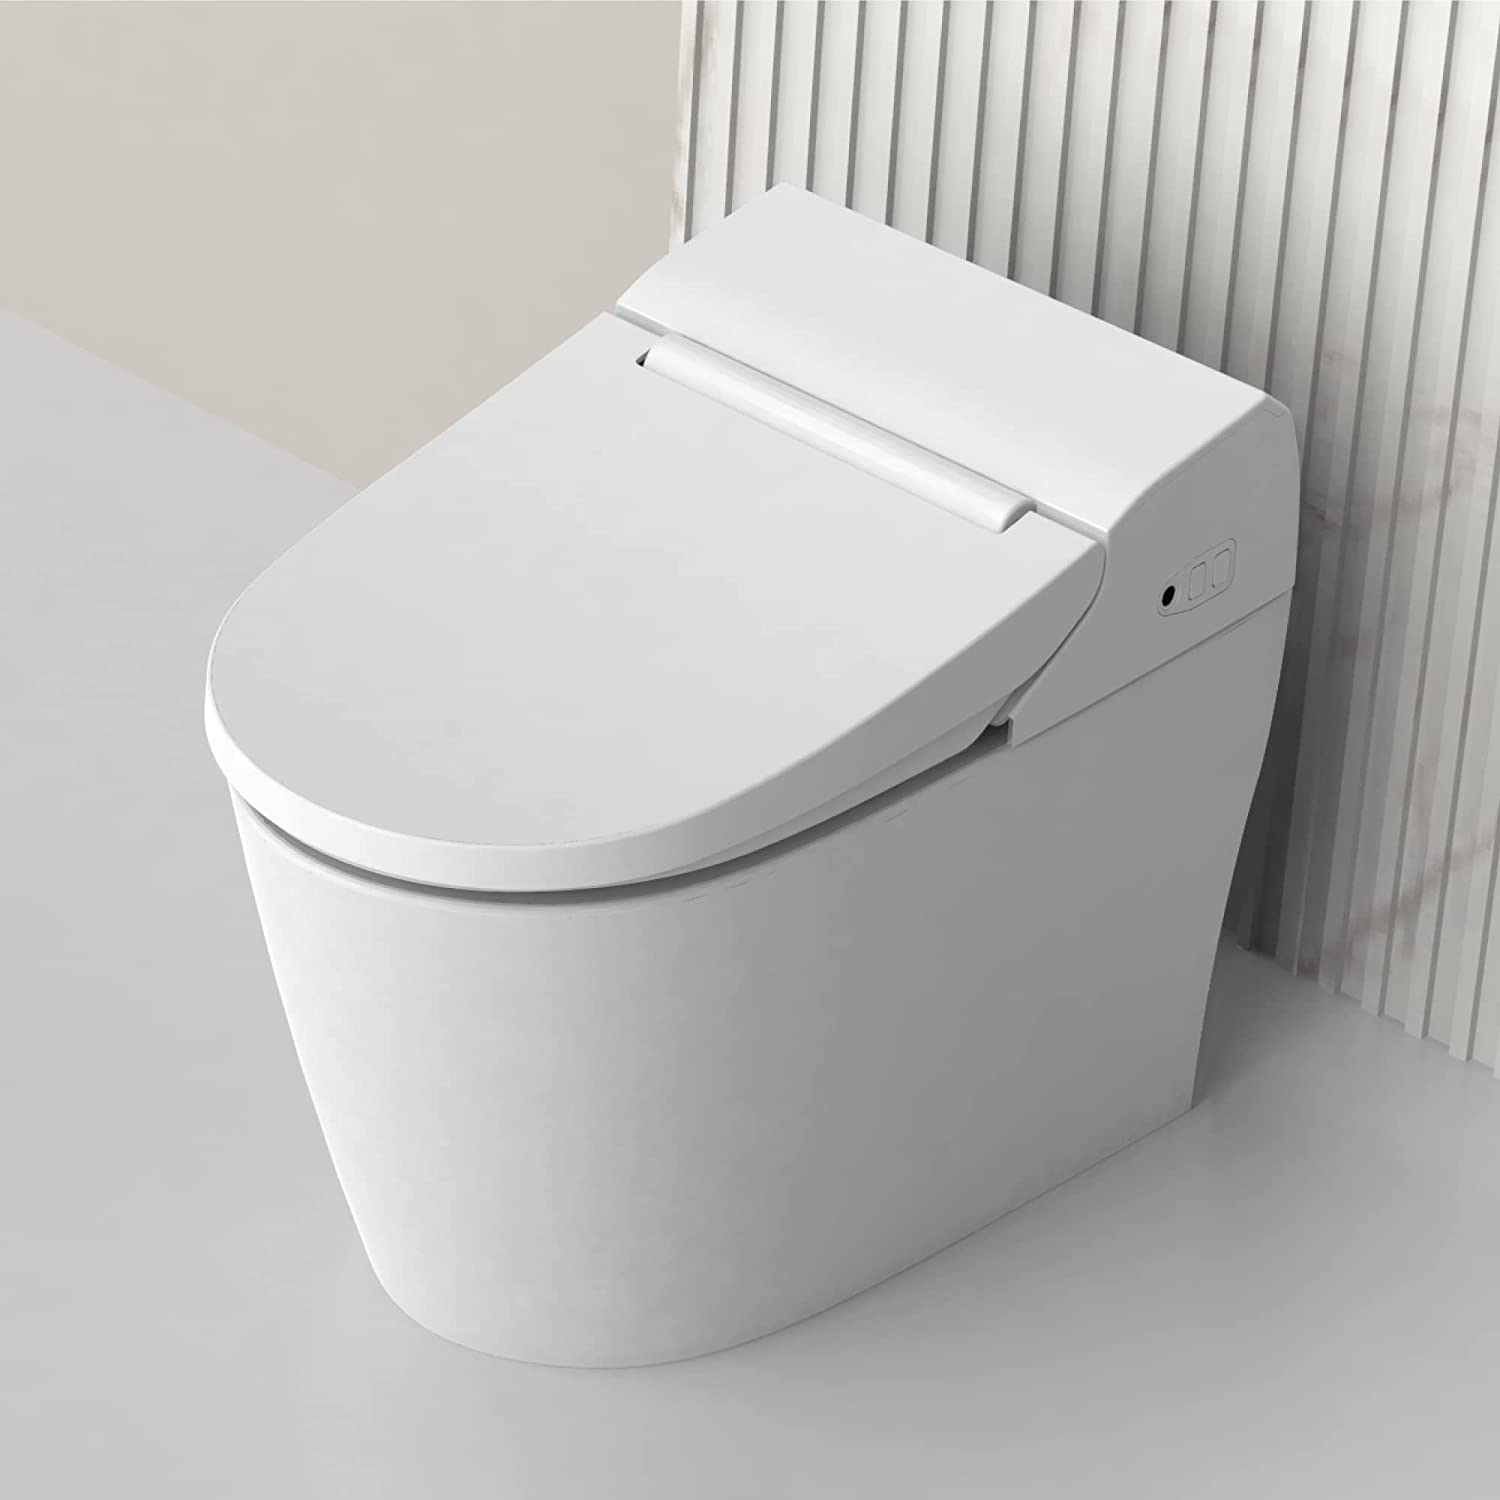 VOVO Tankless Self-Cleaning Toilet